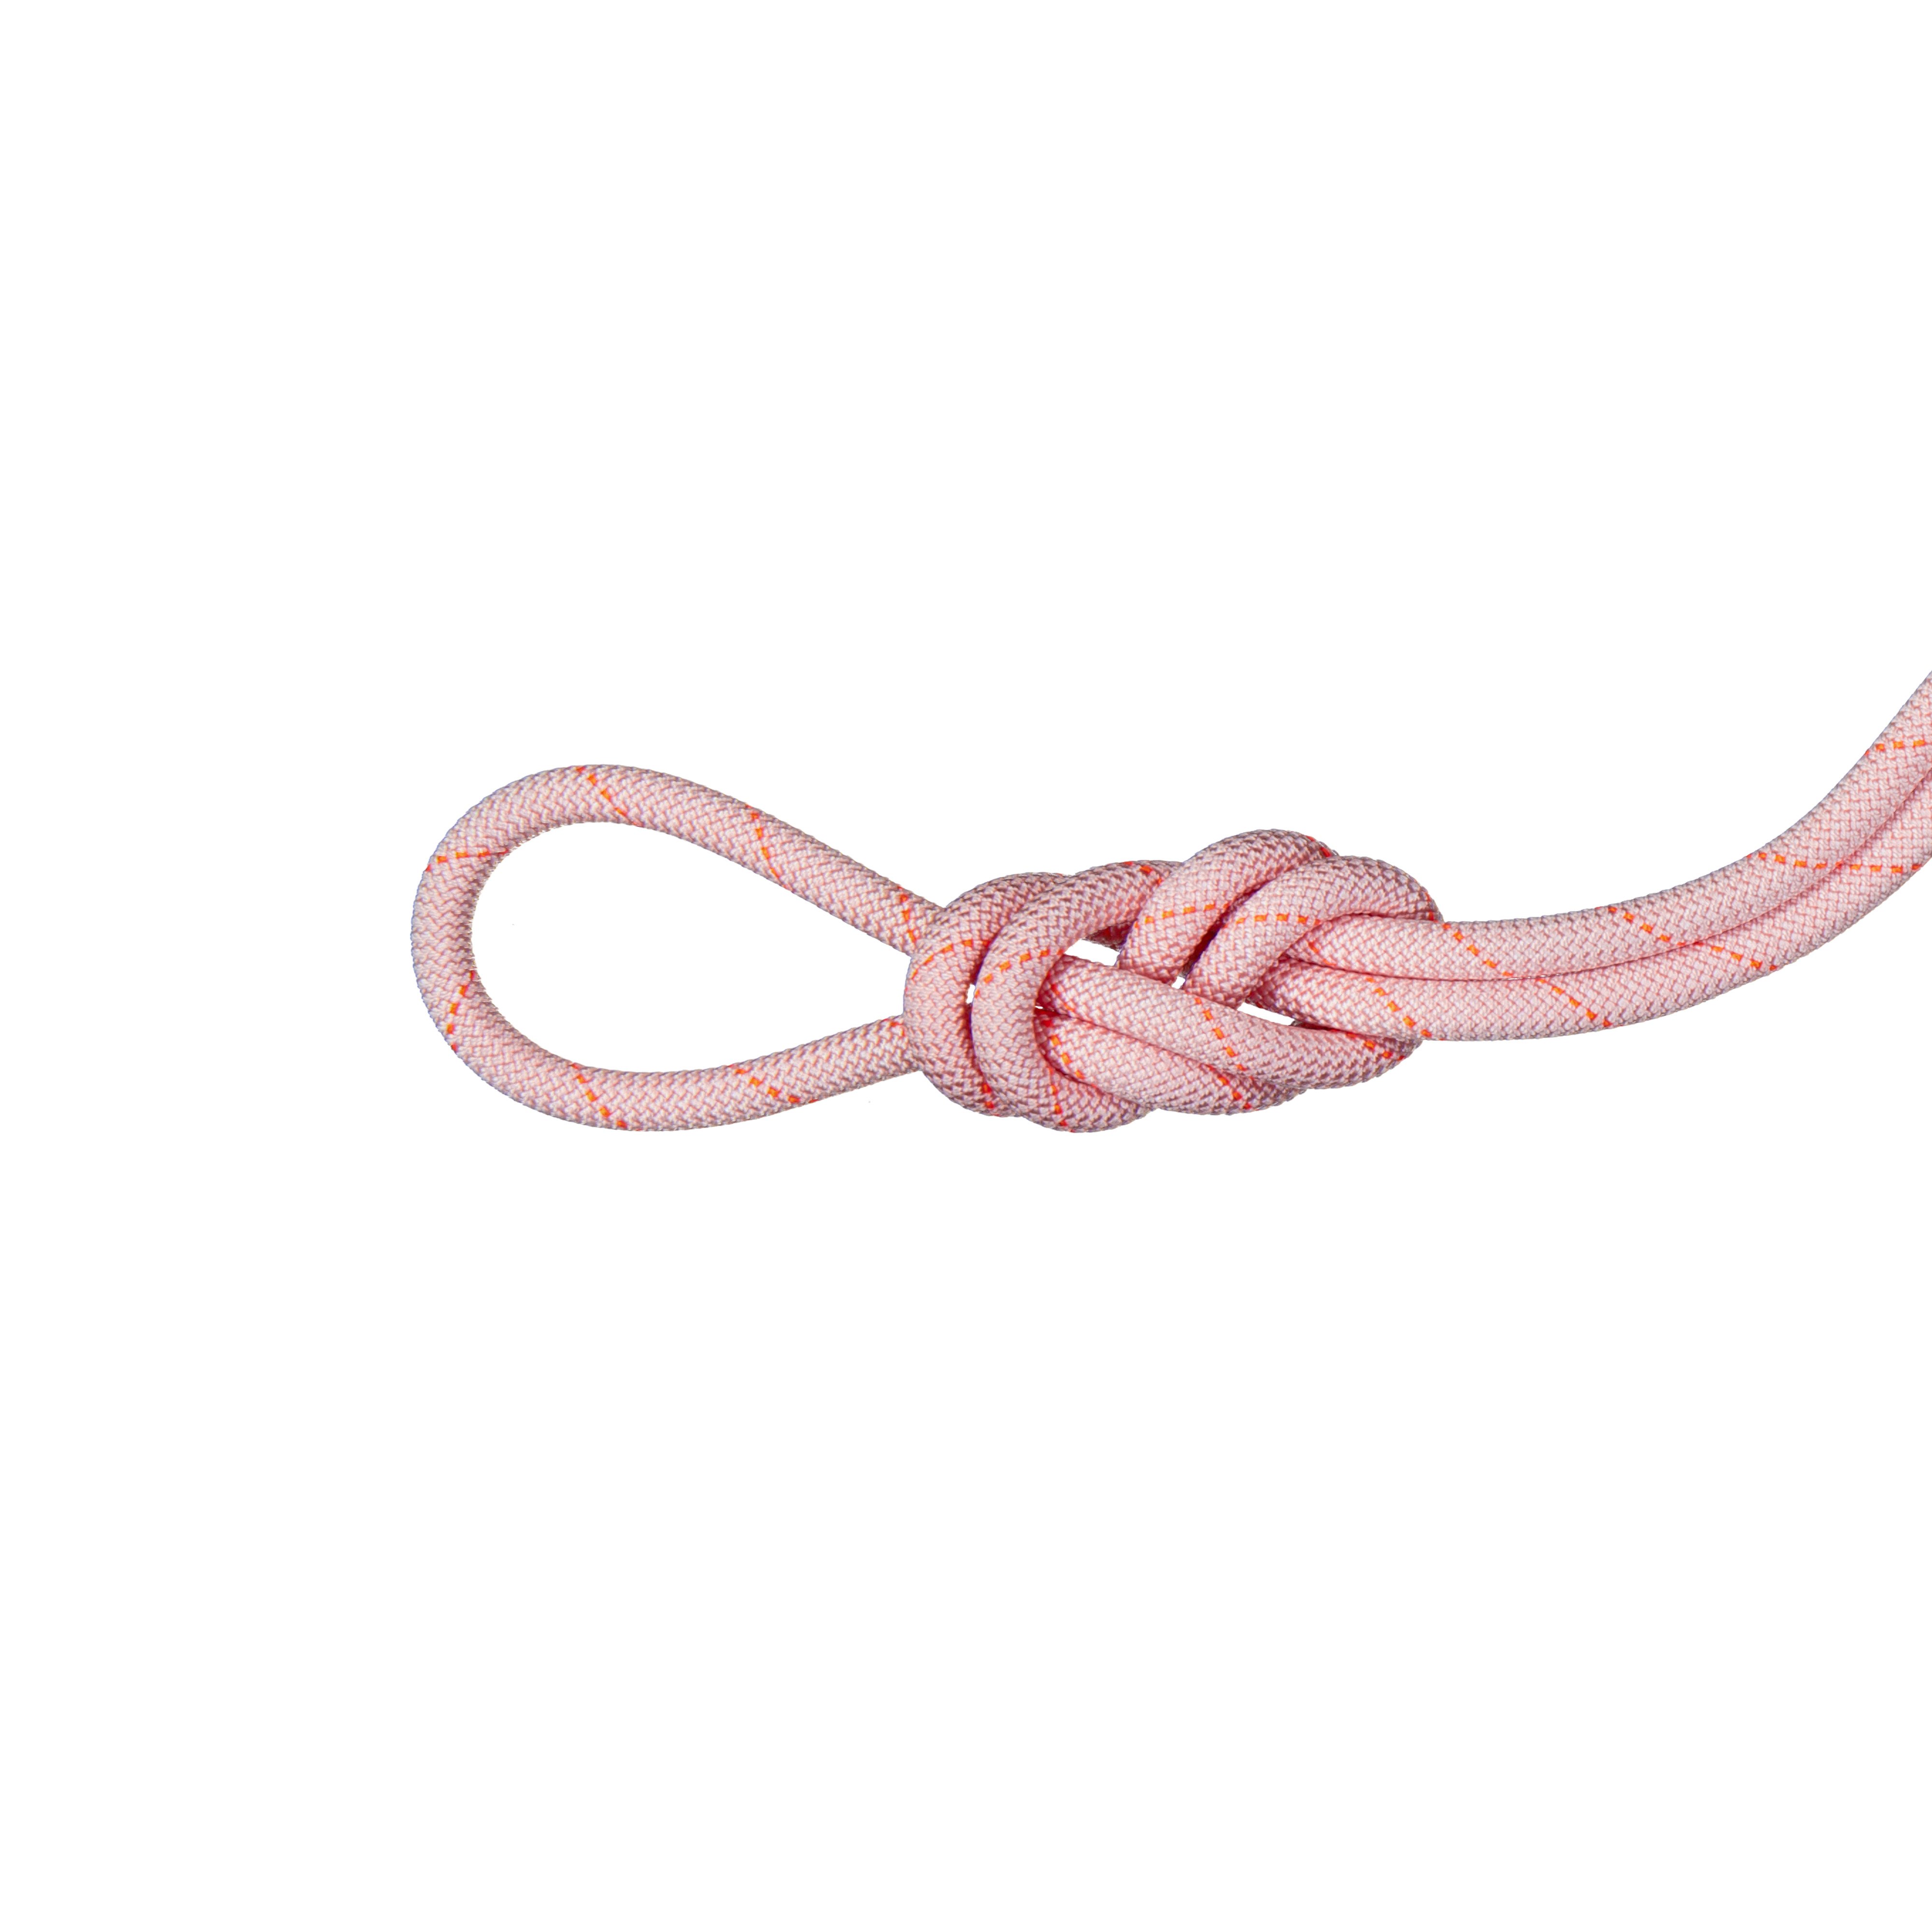 9.9 Gym Workhorse Classic Rope - Classic Standard, candy, 30 m thumbnail